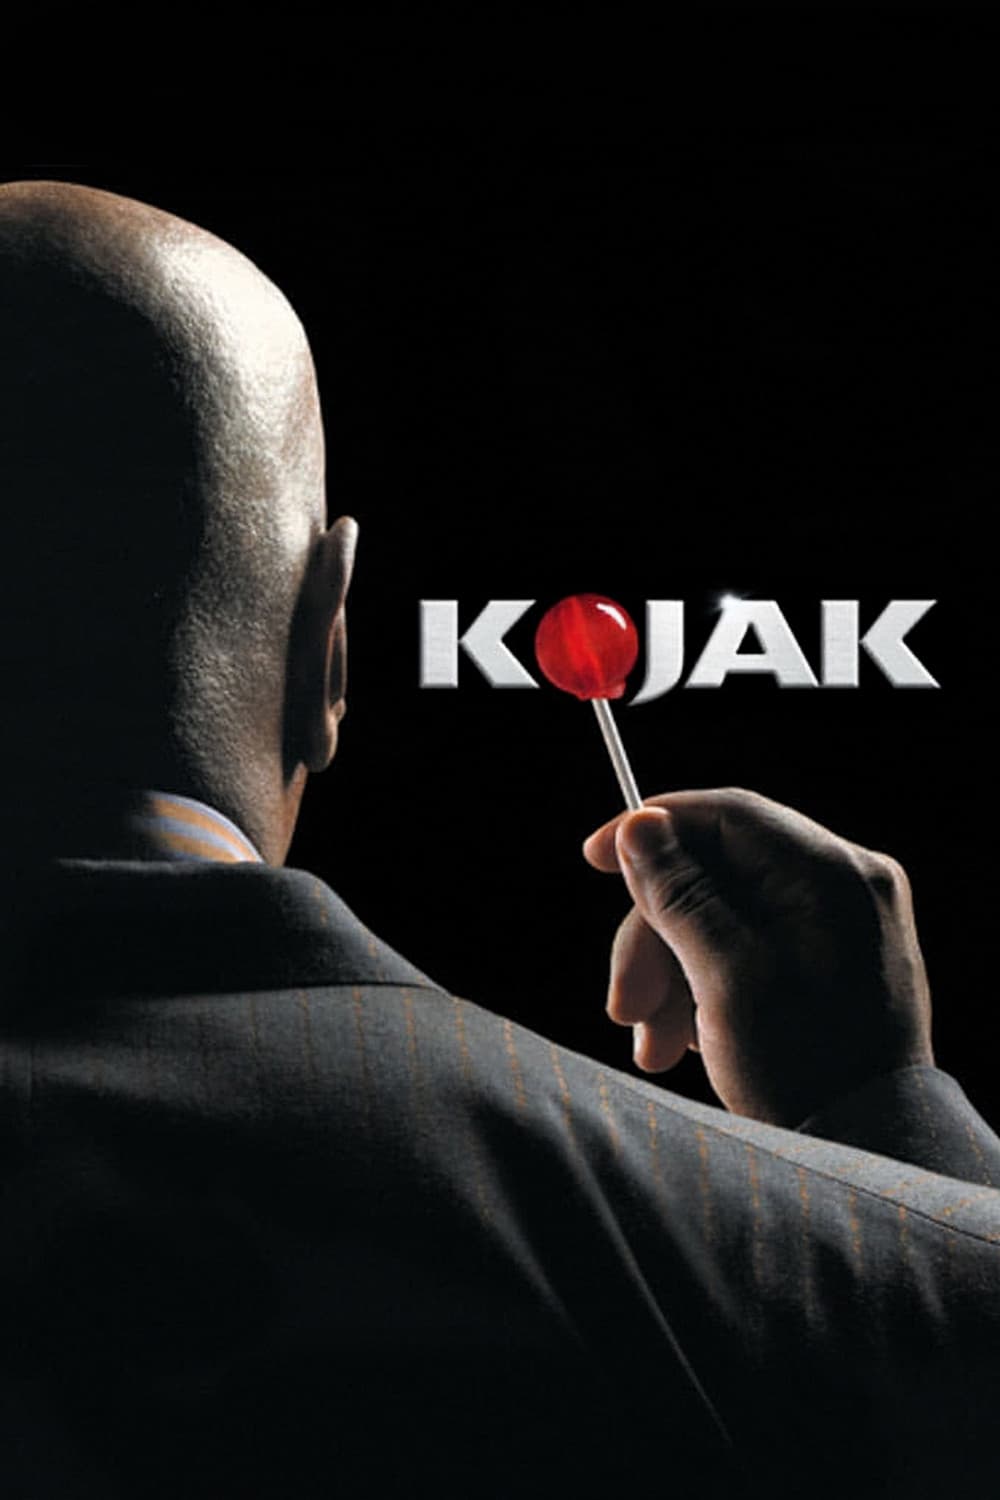 Kojak TV Shows About Nypd